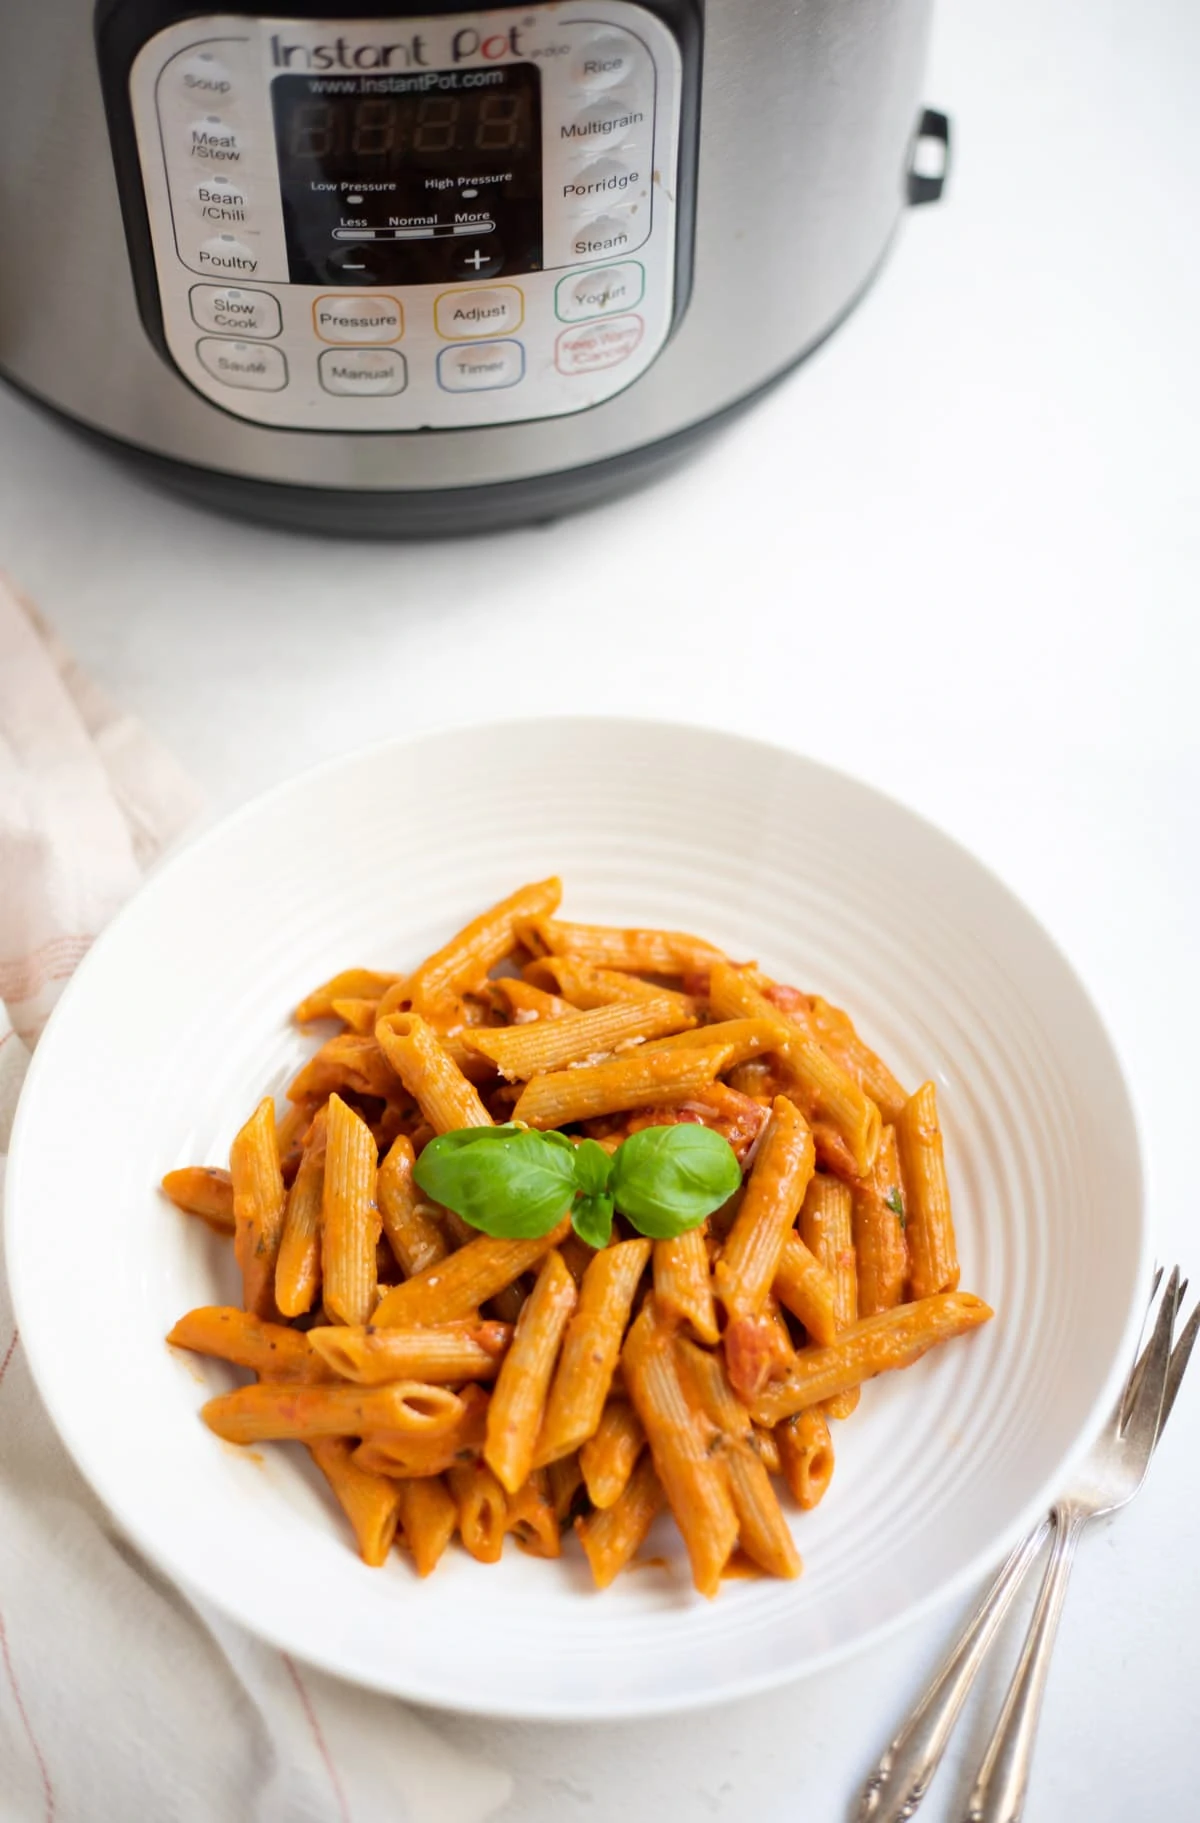 Penne Pasta in Tomato Cream Sauce in a white bowl placed in front of the Instant Pot